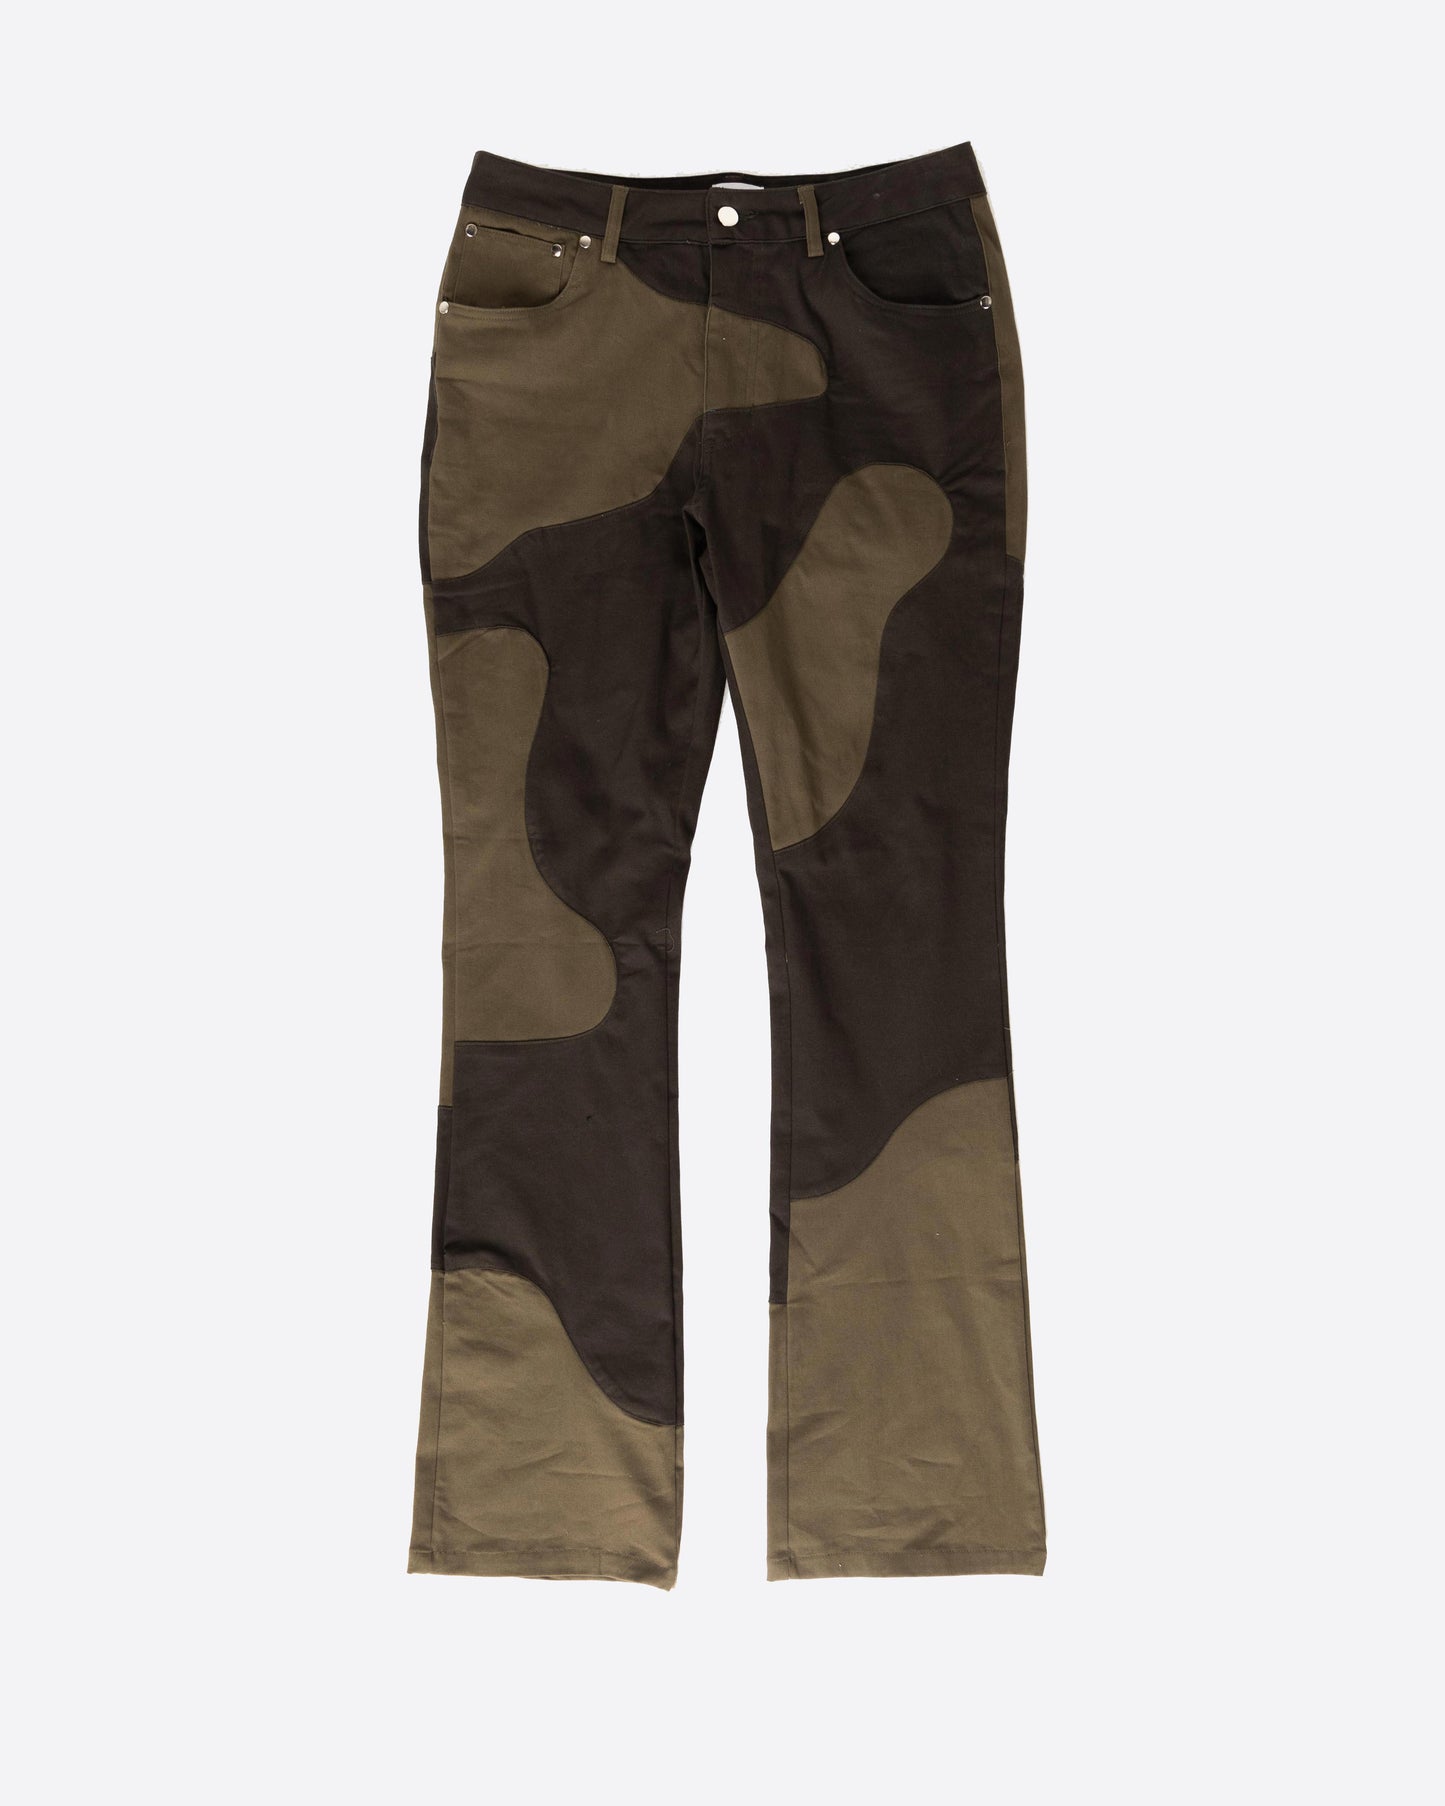 DAVE EAST MARBLE PANTS-OLIVE/OLIVE